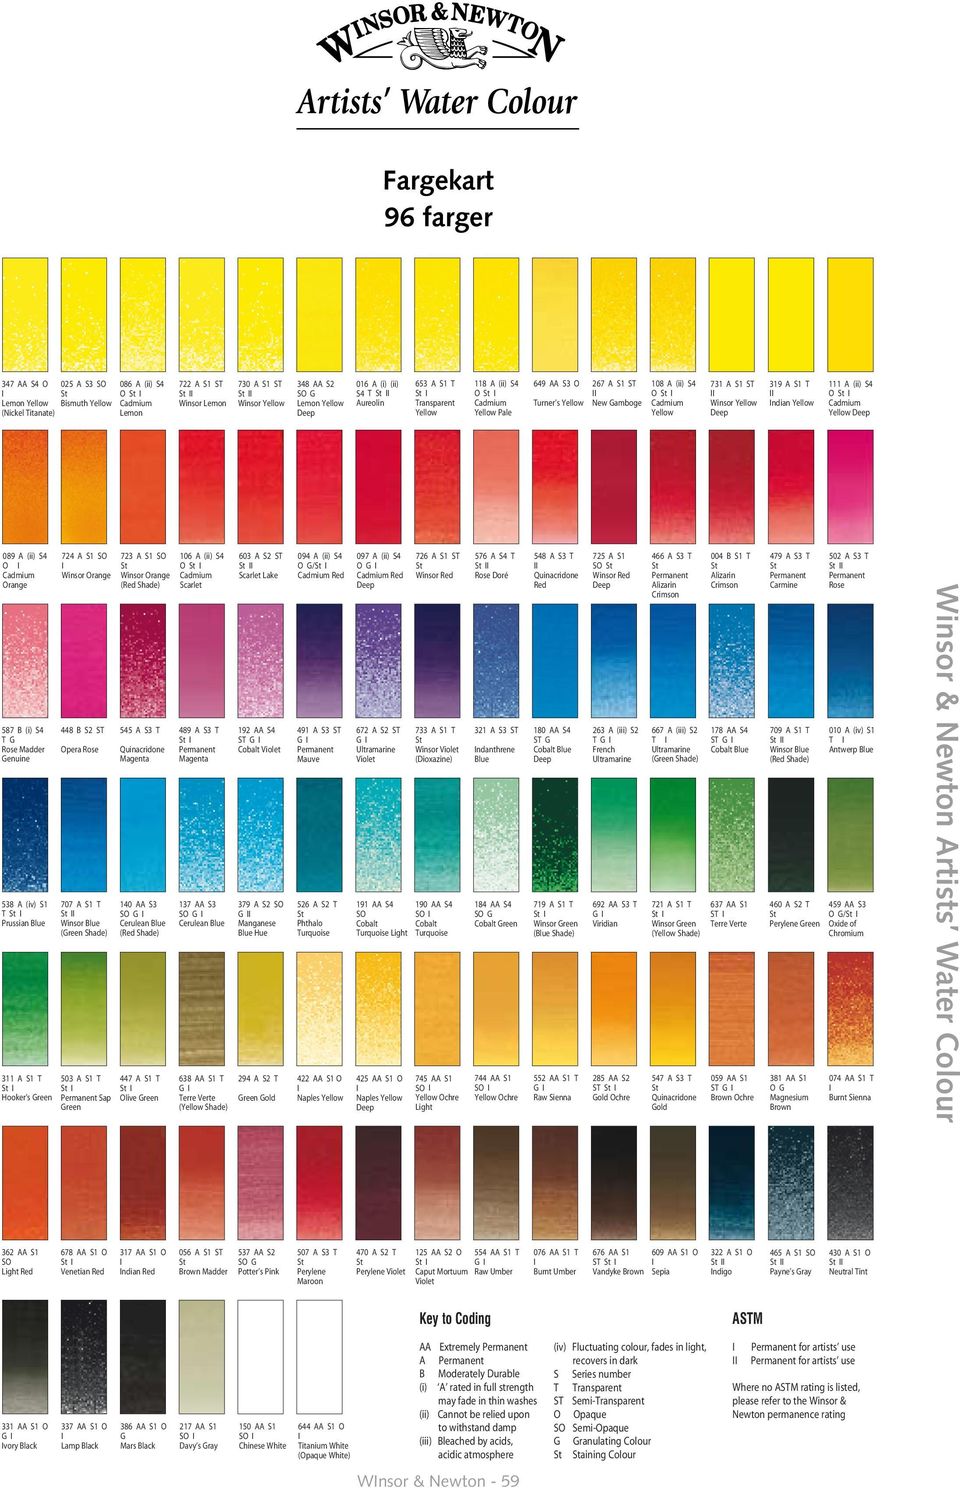 Winsor Yellow Deep 319 A S1 T ndian Yellow 111 A (ii) S4 O Cadmium Yellow Deep 089 A (ii) S4 O Cadmium Orange 587 B (i) S4 T G Rose Madder Genuine 538 A (iv) S1 T Prussian Blue 311 A S1 T Hooker s